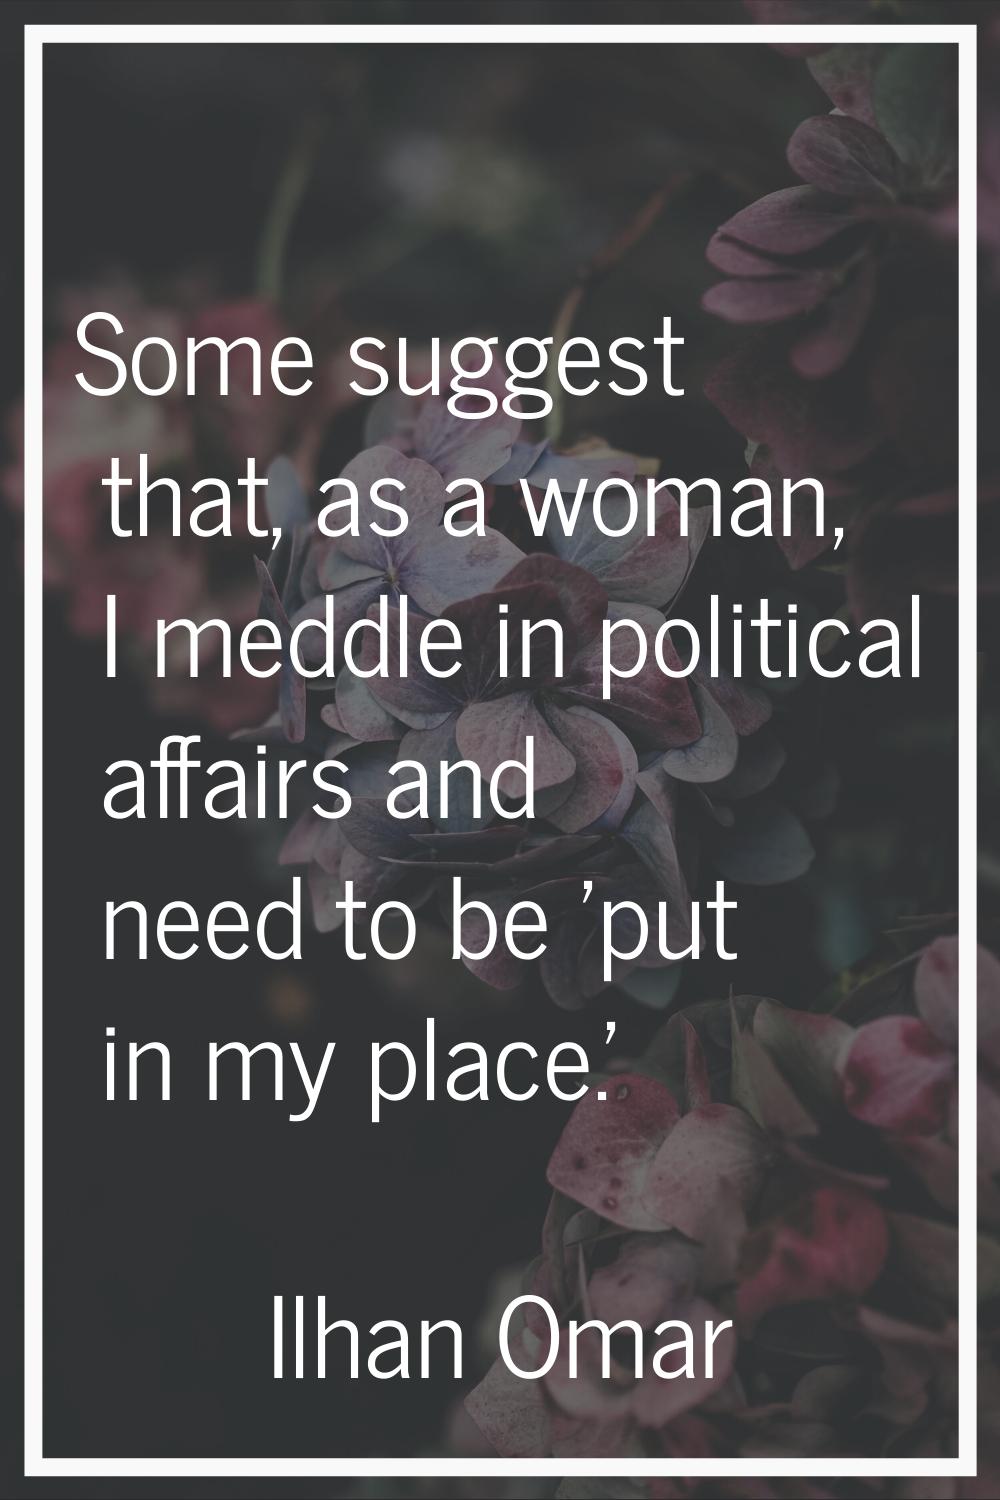 Some suggest that, as a woman, I meddle in political affairs and need to be 'put in my place.'